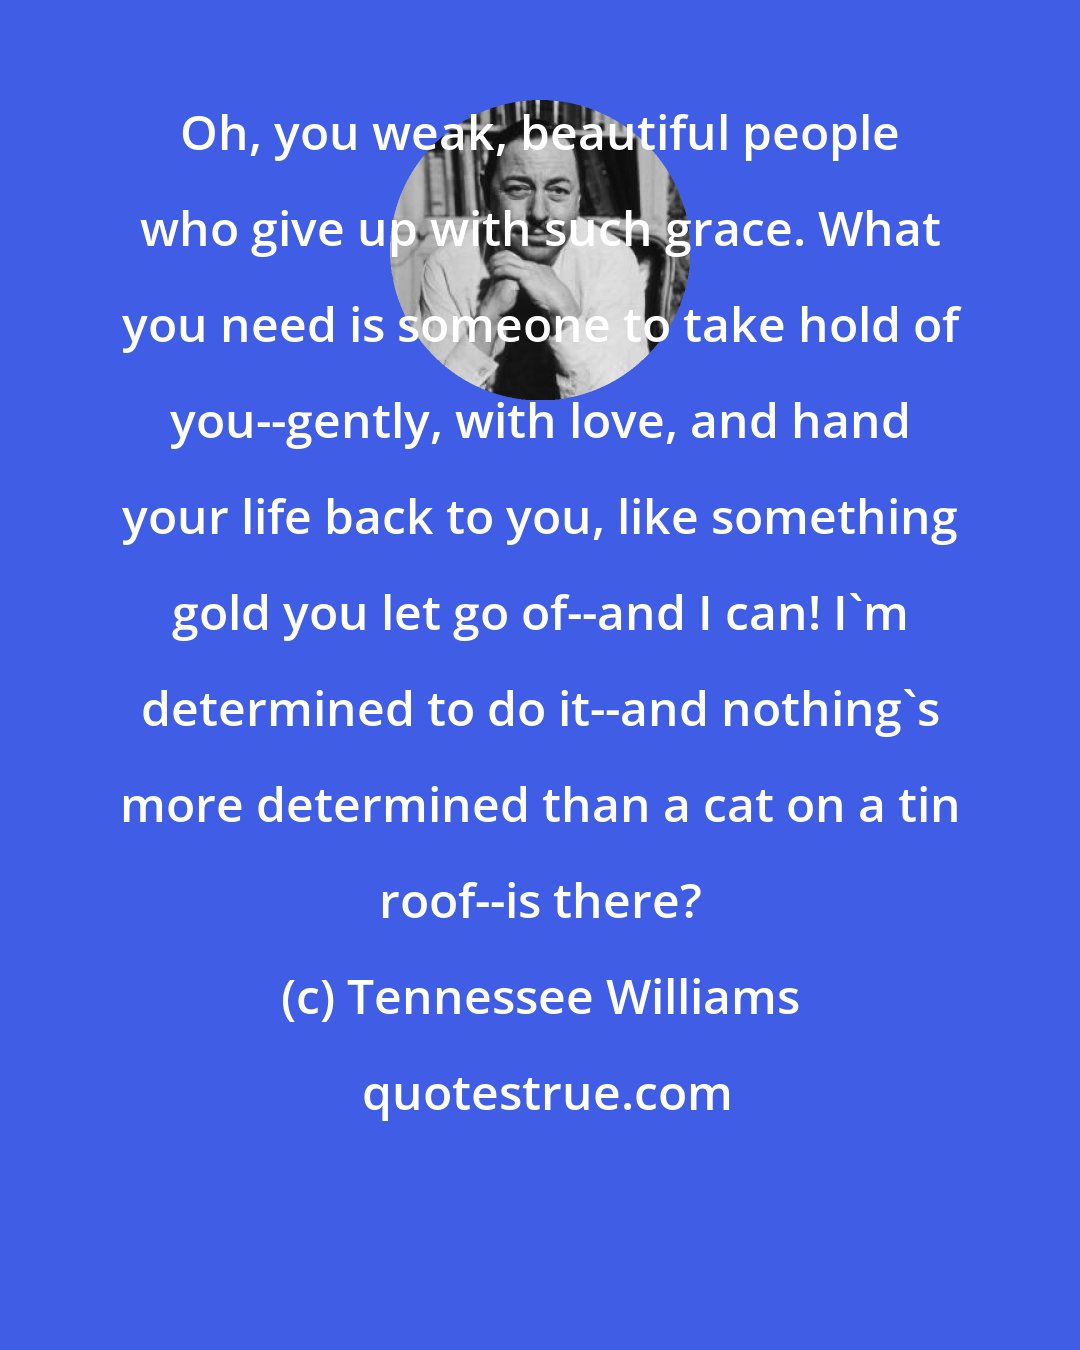 Tennessee Williams: Oh, you weak, beautiful people who give up with such grace. What you need is someone to take hold of you--gently, with love, and hand your life back to you, like something gold you let go of--and I can! I'm determined to do it--and nothing's more determined than a cat on a tin roof--is there?